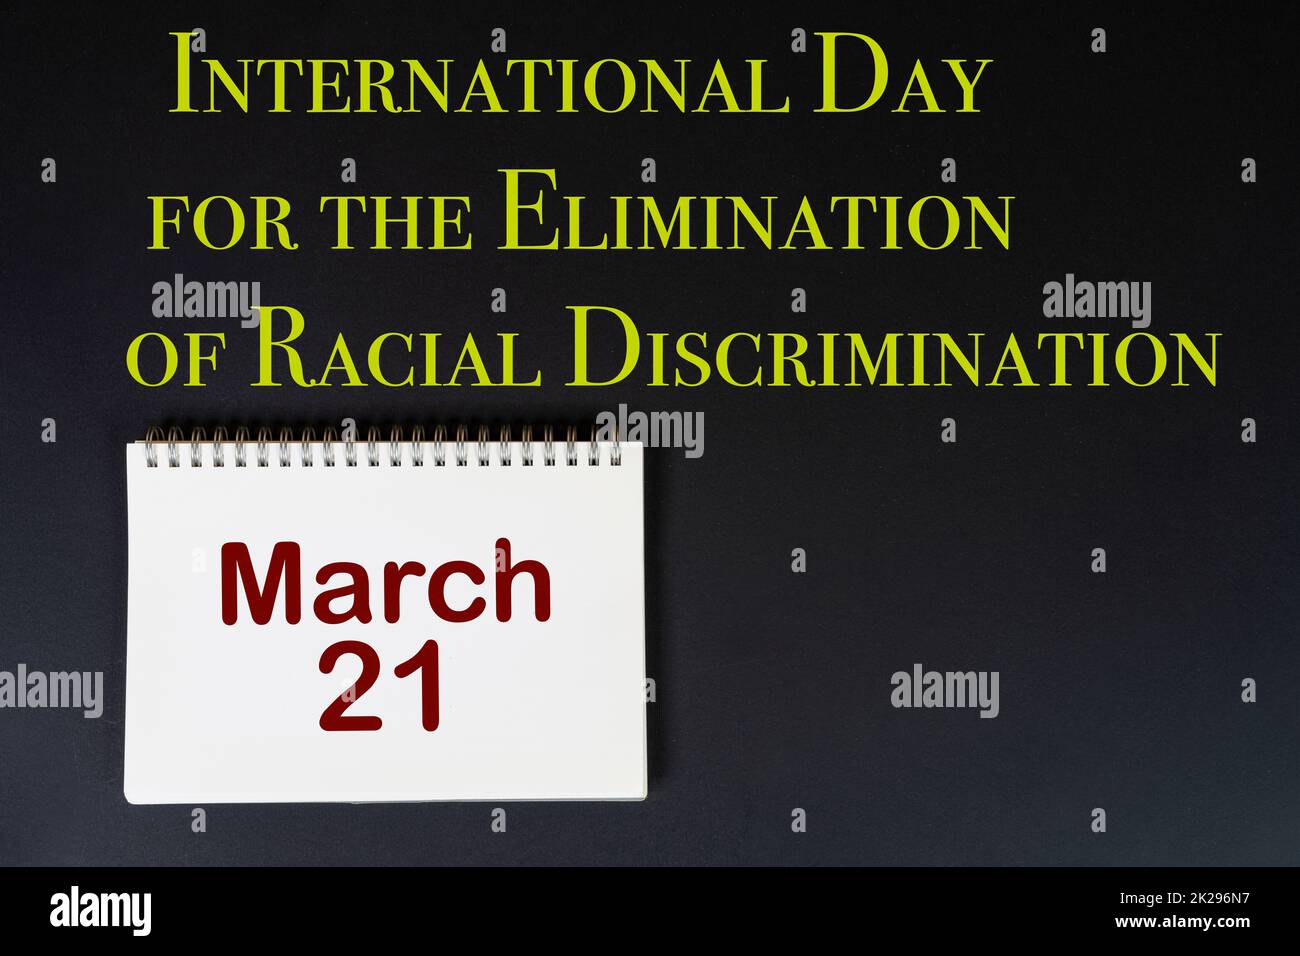 International Day for the Elimination of Racial Discriminations Stock Photo